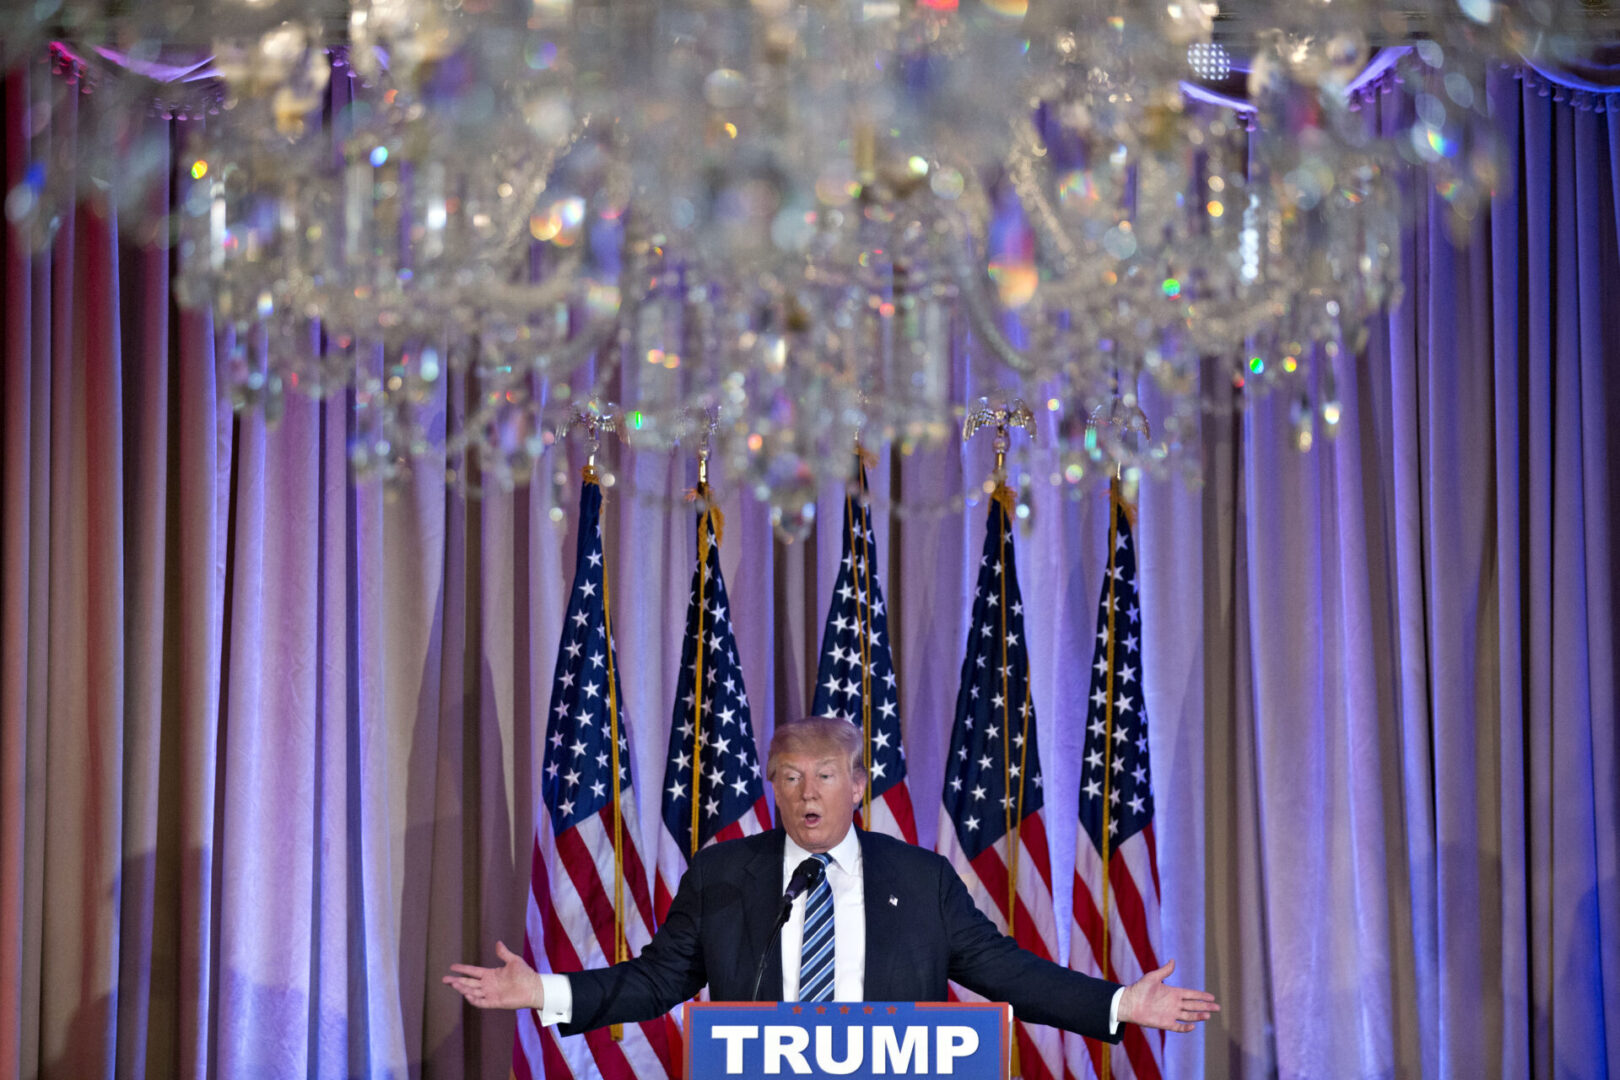 Donald Trump, president and chief executive of Trump Organization Inc. and 2016 Republican presidential candidate, speaks during a news conference at the Mar-A-Lago Club in Palm Beach, Florida, U.S., on Friday, March 11, 2016. Ben Carson, who recently ended his quest for Republican presidential nomination, endorsed his onetime rival Donald Trump Friday striking a blow to presidential candidate Senator Ted Cruz, who had courted Carson because they appeal to many of the same religious-minded voters. Photographer: Andrew Harrer/Bloomberg via Getty Images